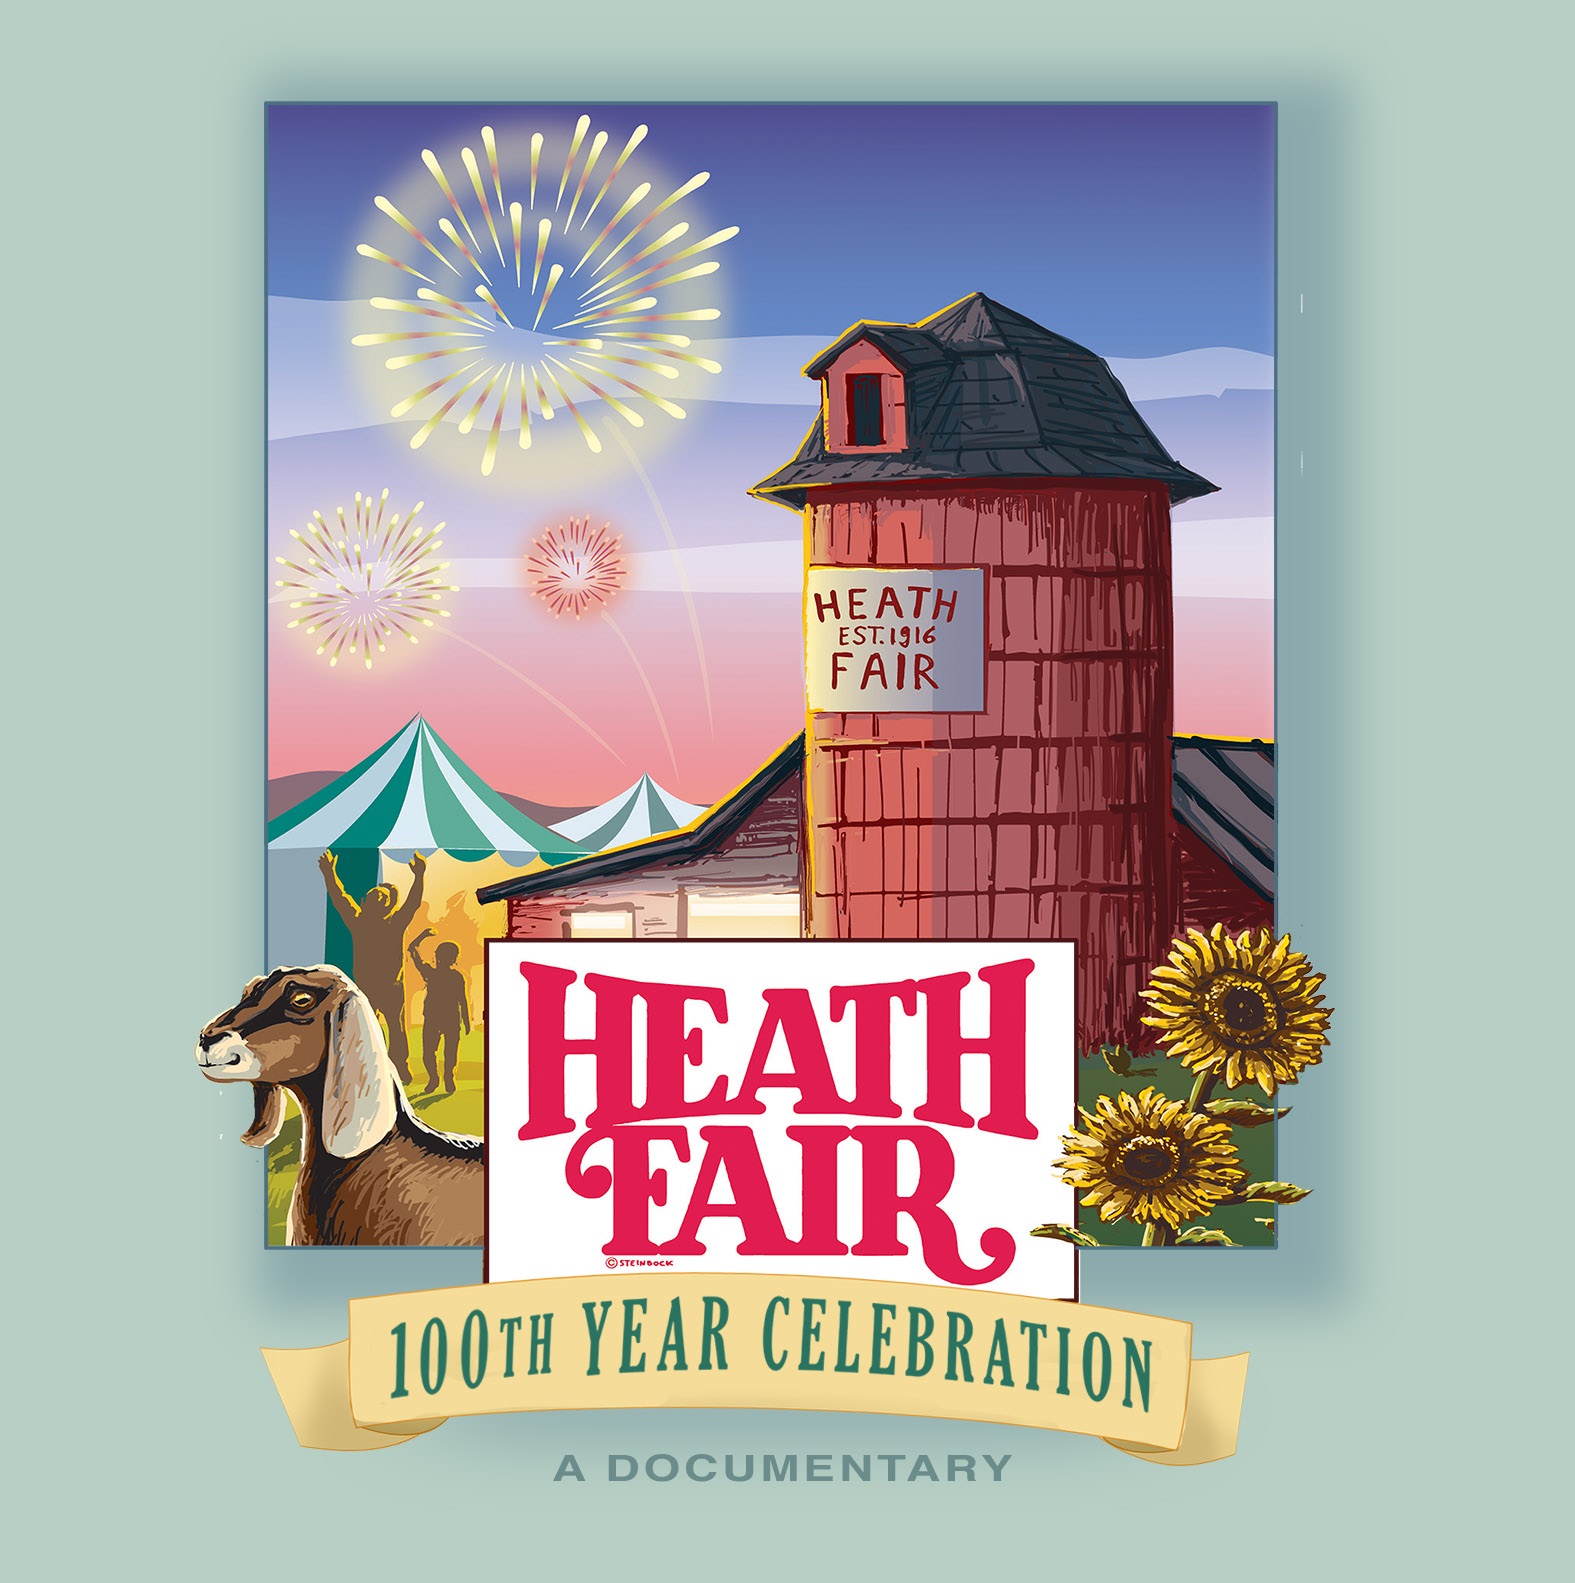 Experience the Heath Fair 100 years in the Making Sunday, August